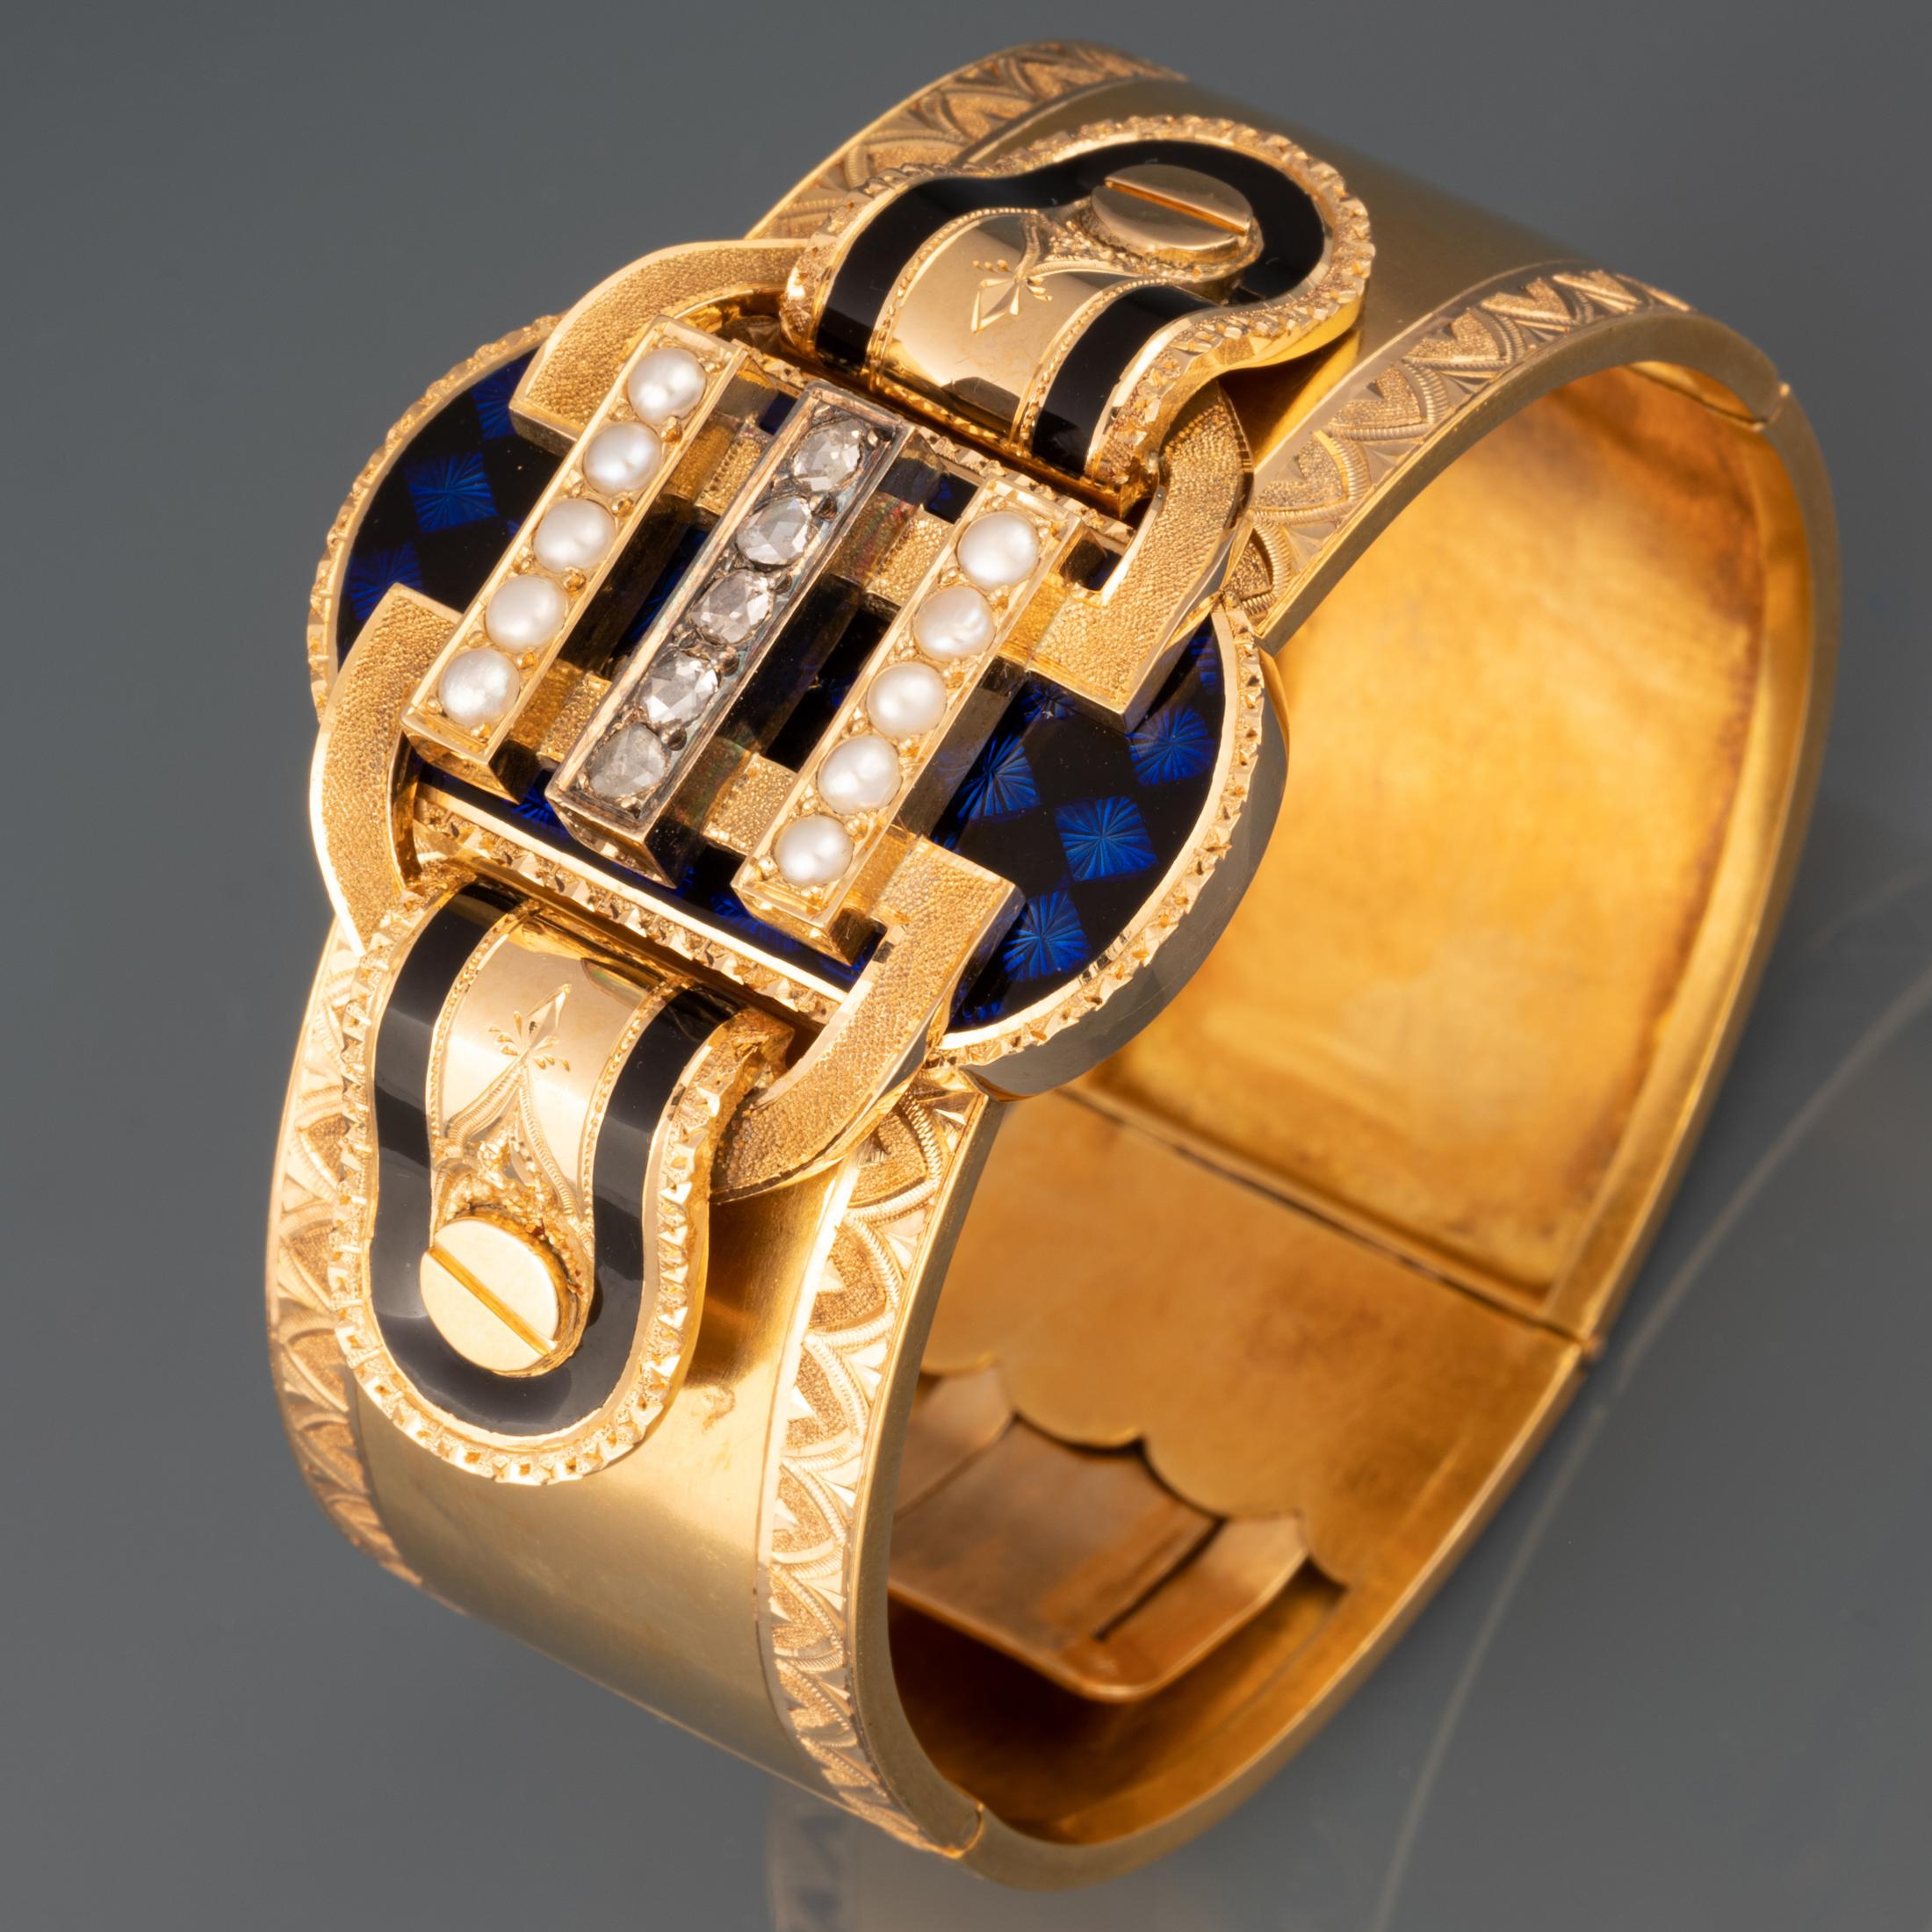 Gold and Enamel Napoleon III Bracelet In Good Condition For Sale In Saint-Ouen, FR